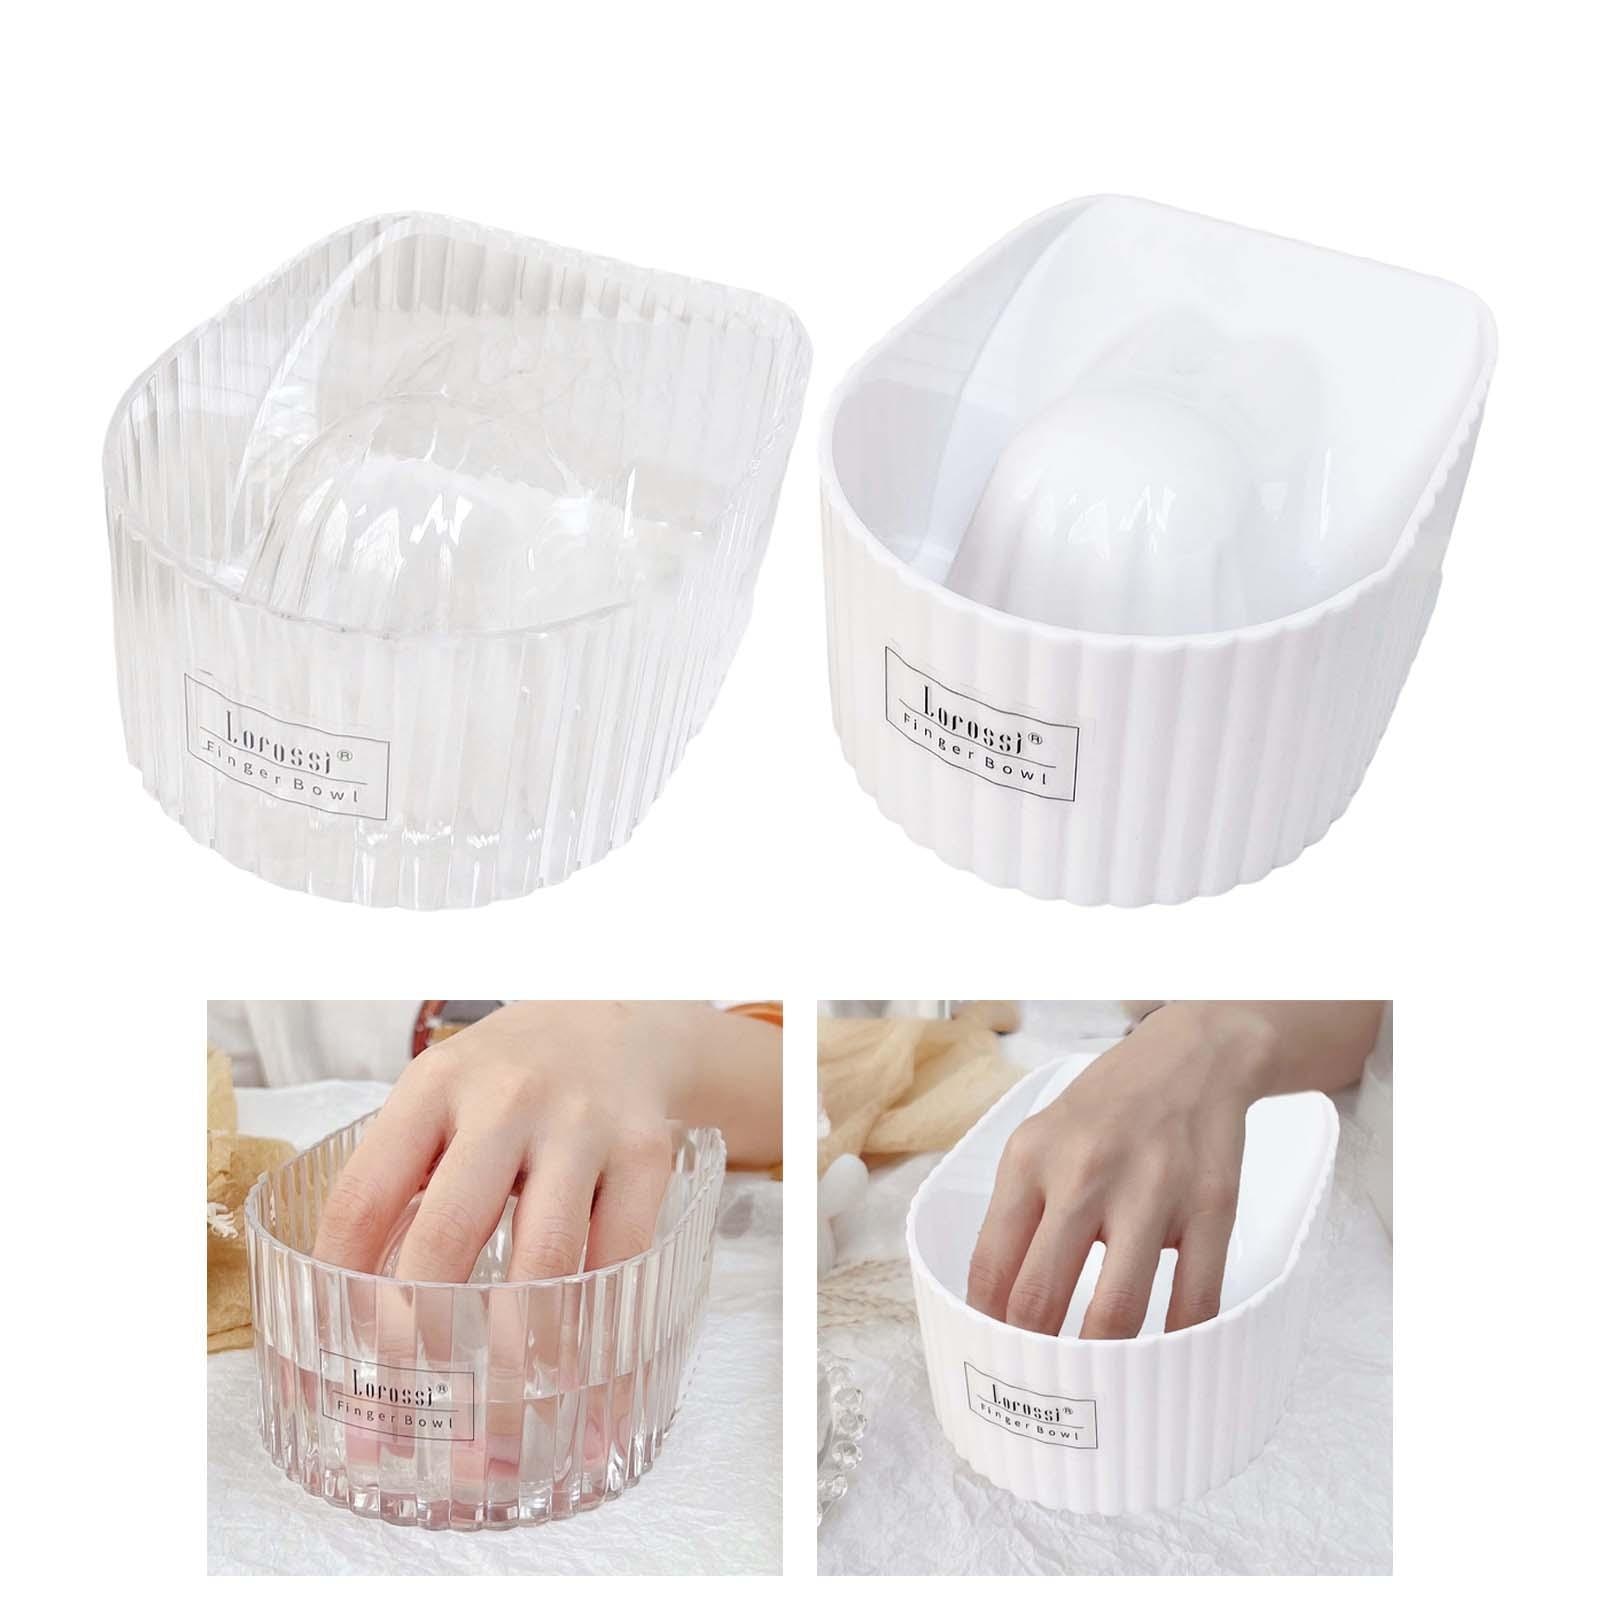 Compact Nail Soaking Bowl Comfortable Soak Off Polish Remover for Nail Cleaning Manicure Nail Art Tool Women Girls Professions